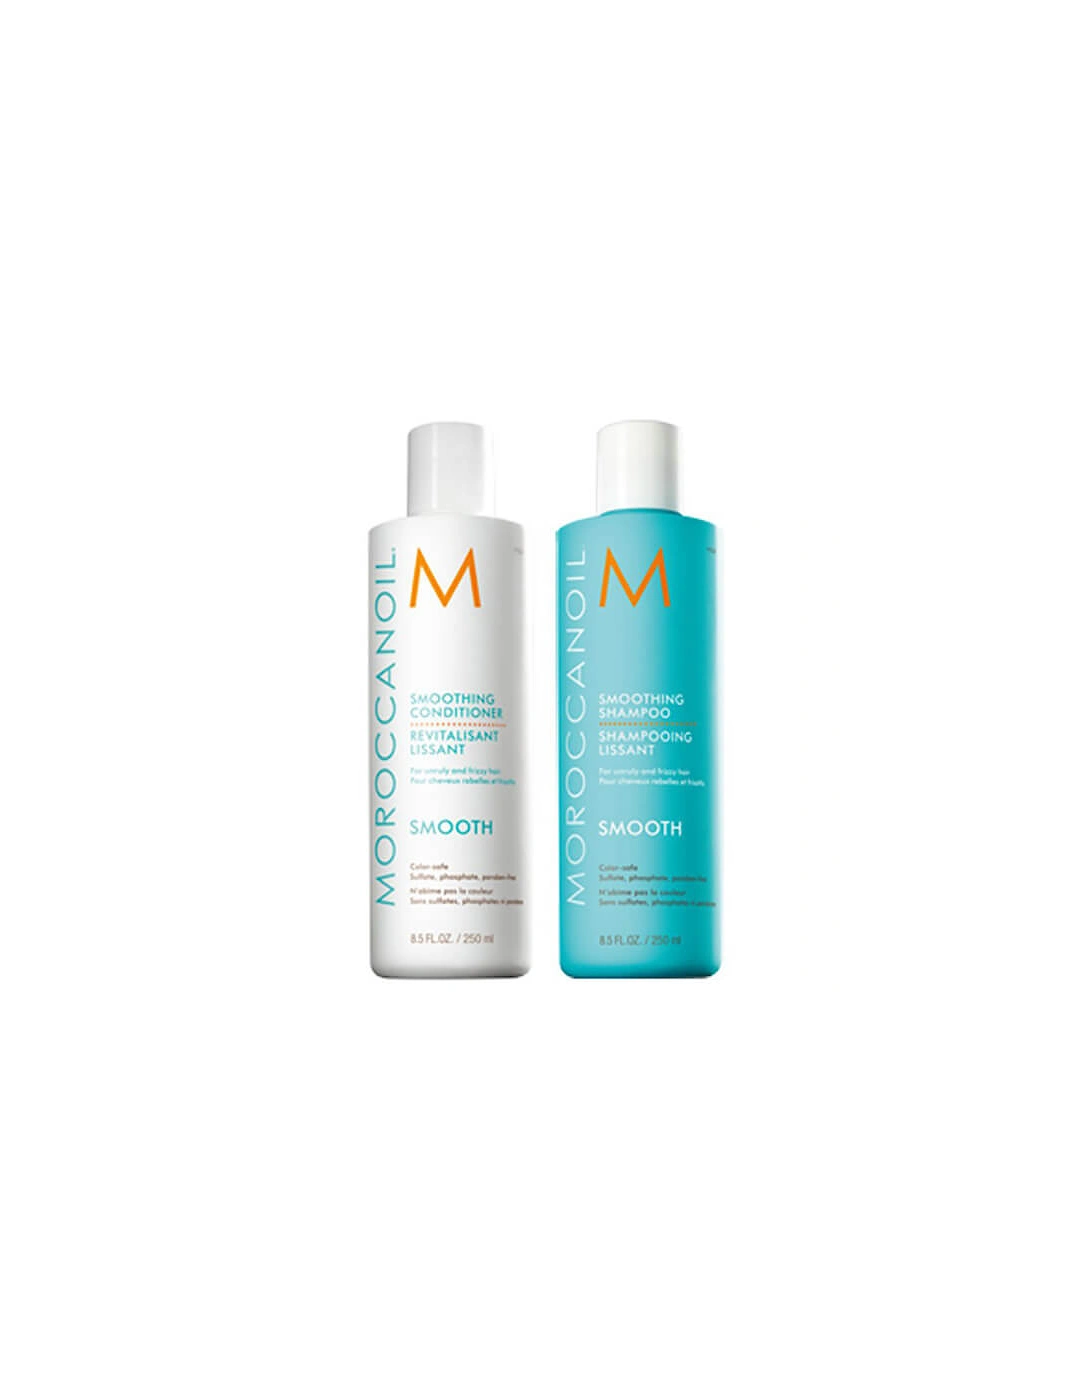 Moroccanoil Smoothing Shampoo and Conditioner Duo 2 x 250ml - Moroccanoil, 2 of 1